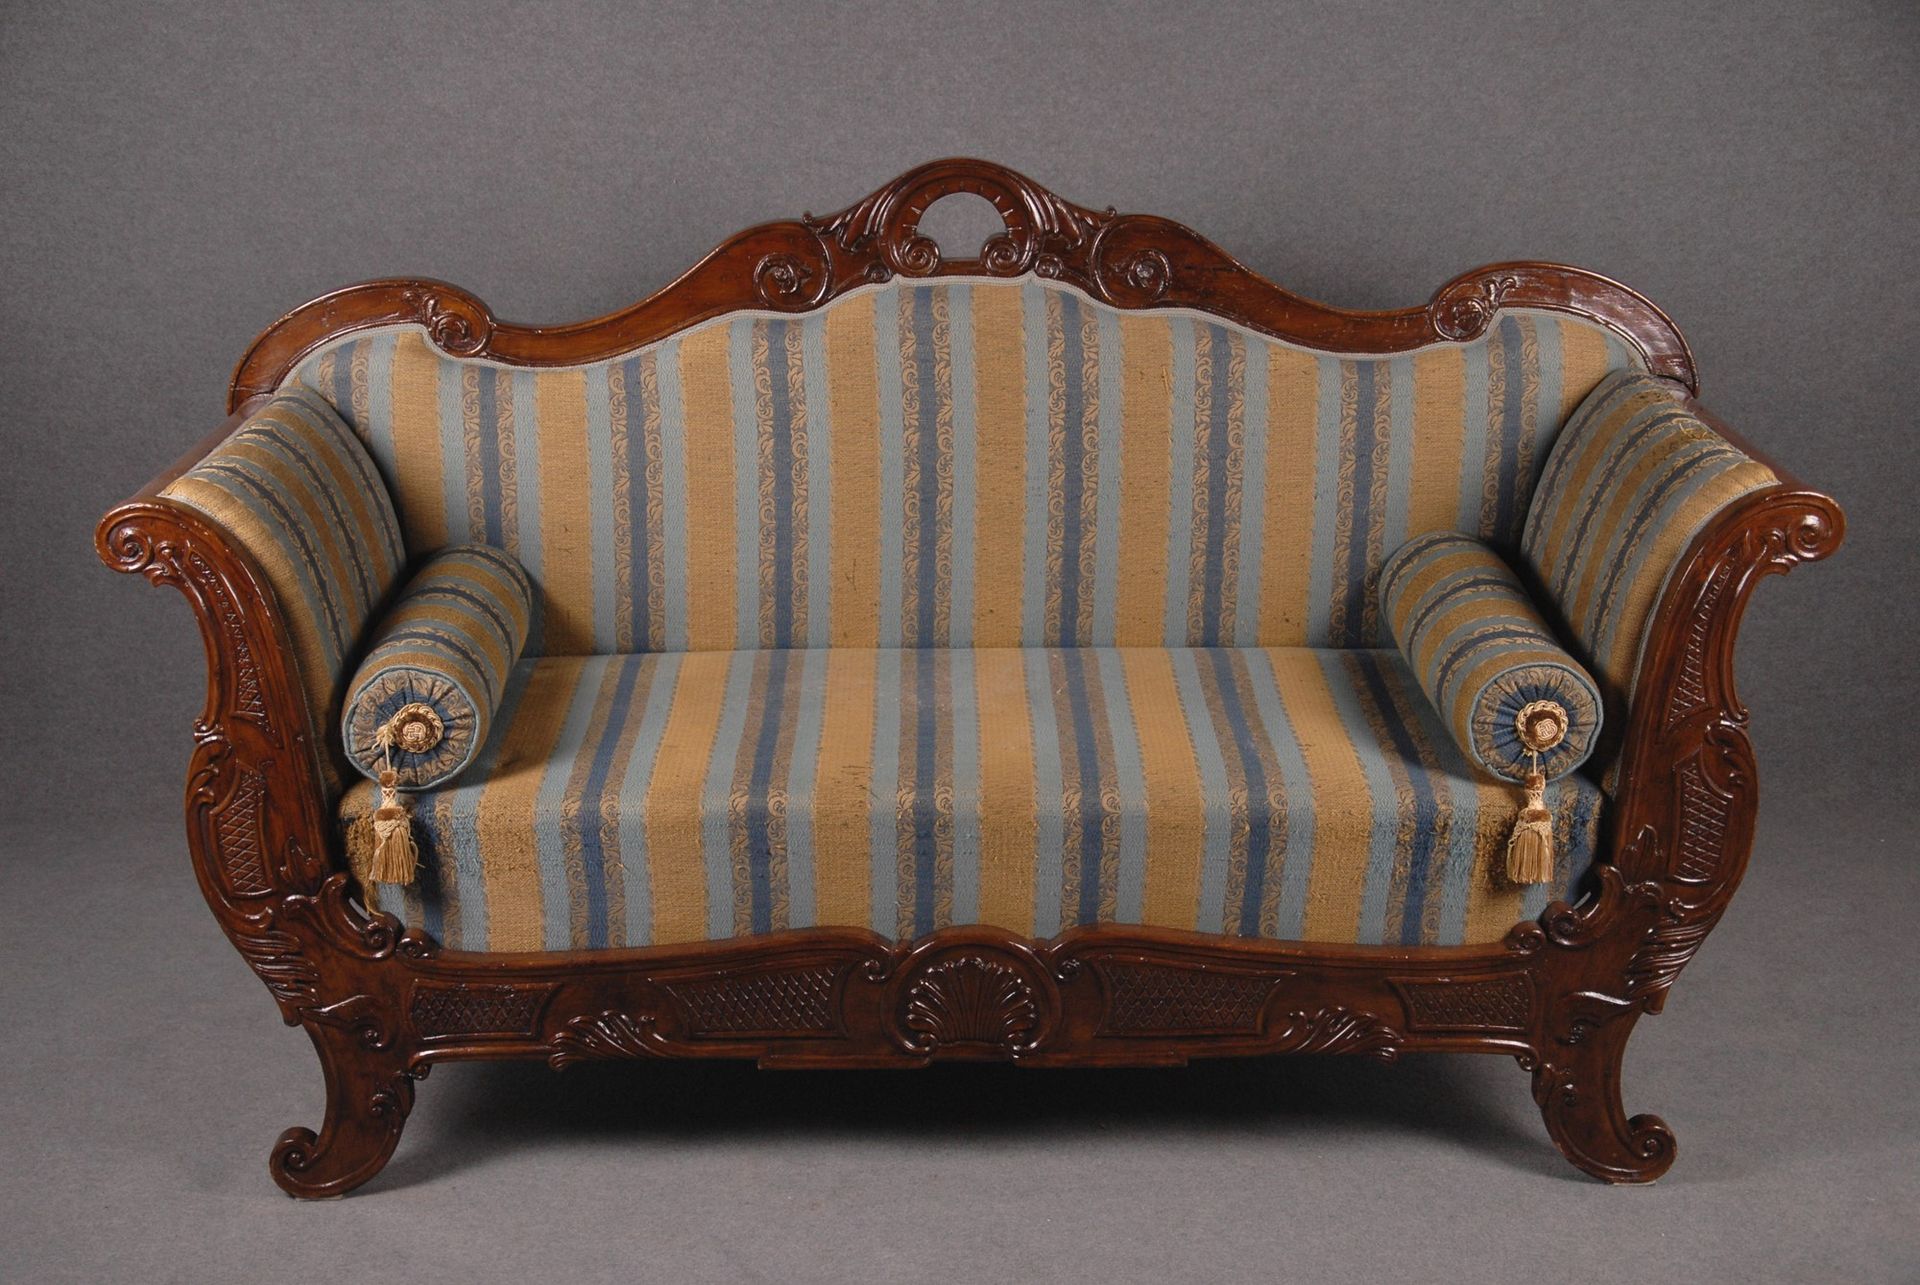 Sofa Corbeille sofa in walnut carved in geometric and scroll motifs with damask &hellip;